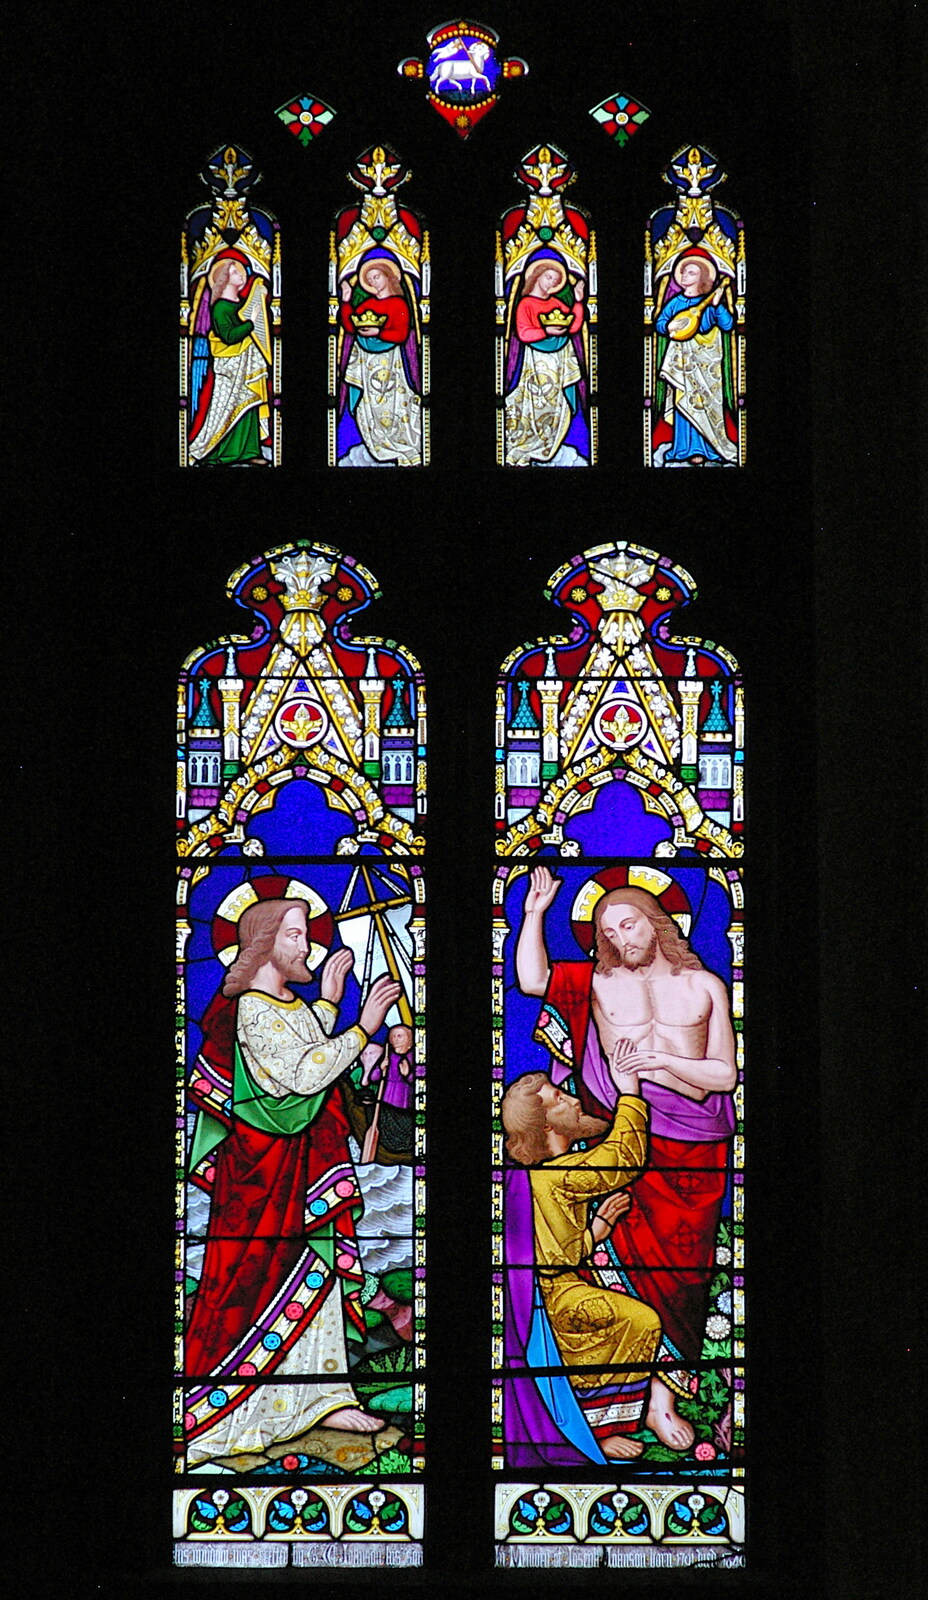 More stained glass from Peterborough Cathedral, Cambridgeshire - 7th September 2005